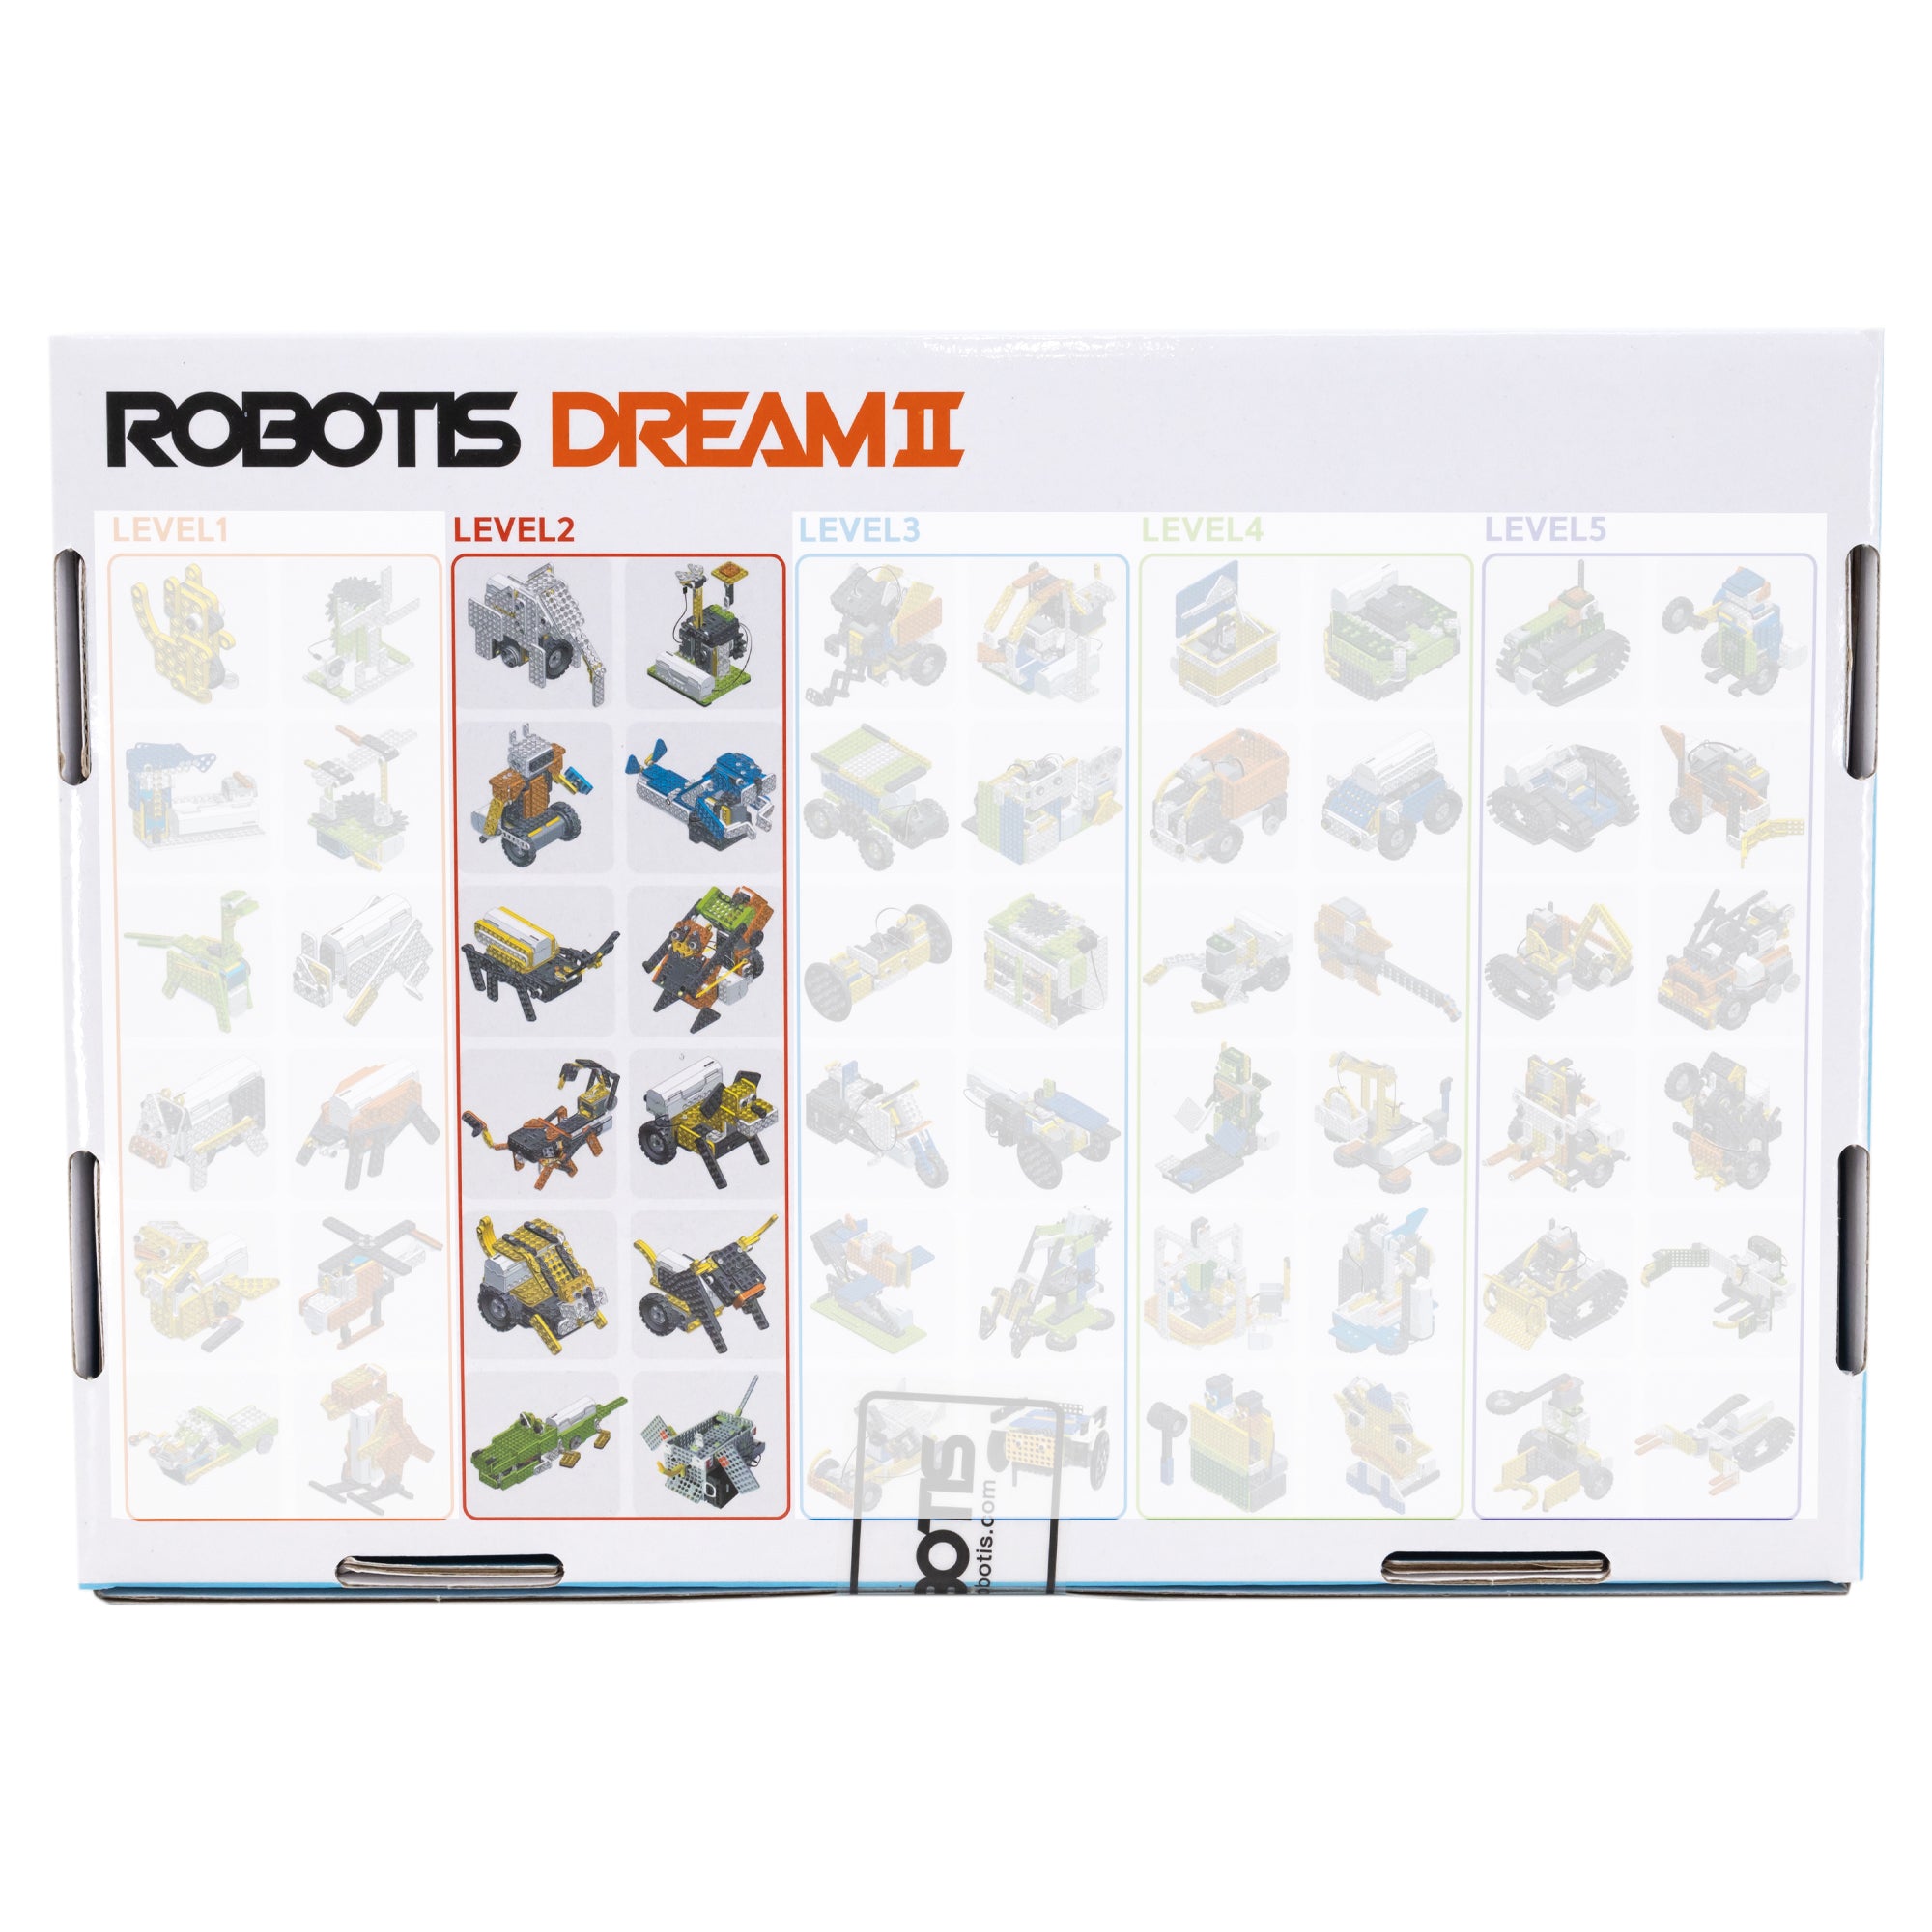 The back of the Robotis Dream 2 box. It is sectioned into 5 levels with 12 building project in each section. The build projects appear to be more advanced as you move through the levels. Level 1, 3, 4, and 5 sections are grayed out, showing that the box includes the set in the Level 2 section.